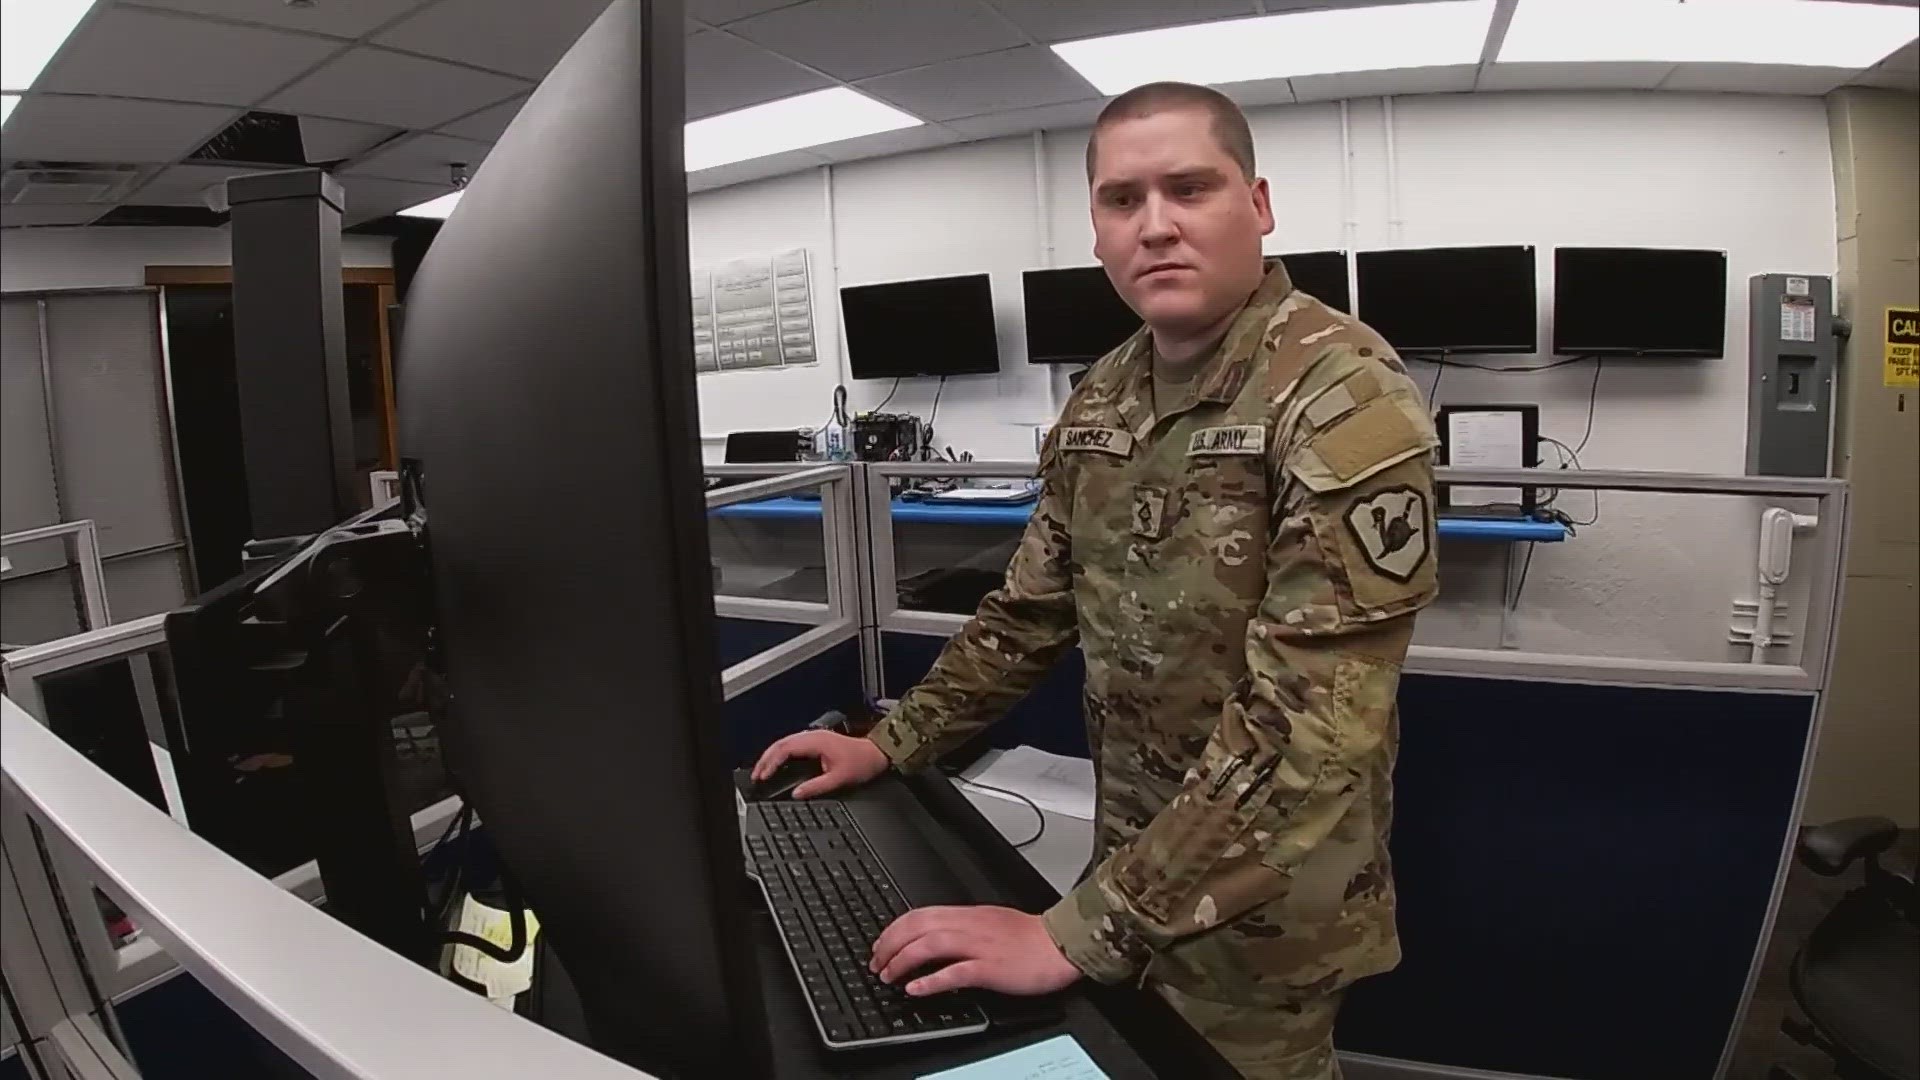 See how this Arizona Army national guardsman helps keep everyone safe using technology.